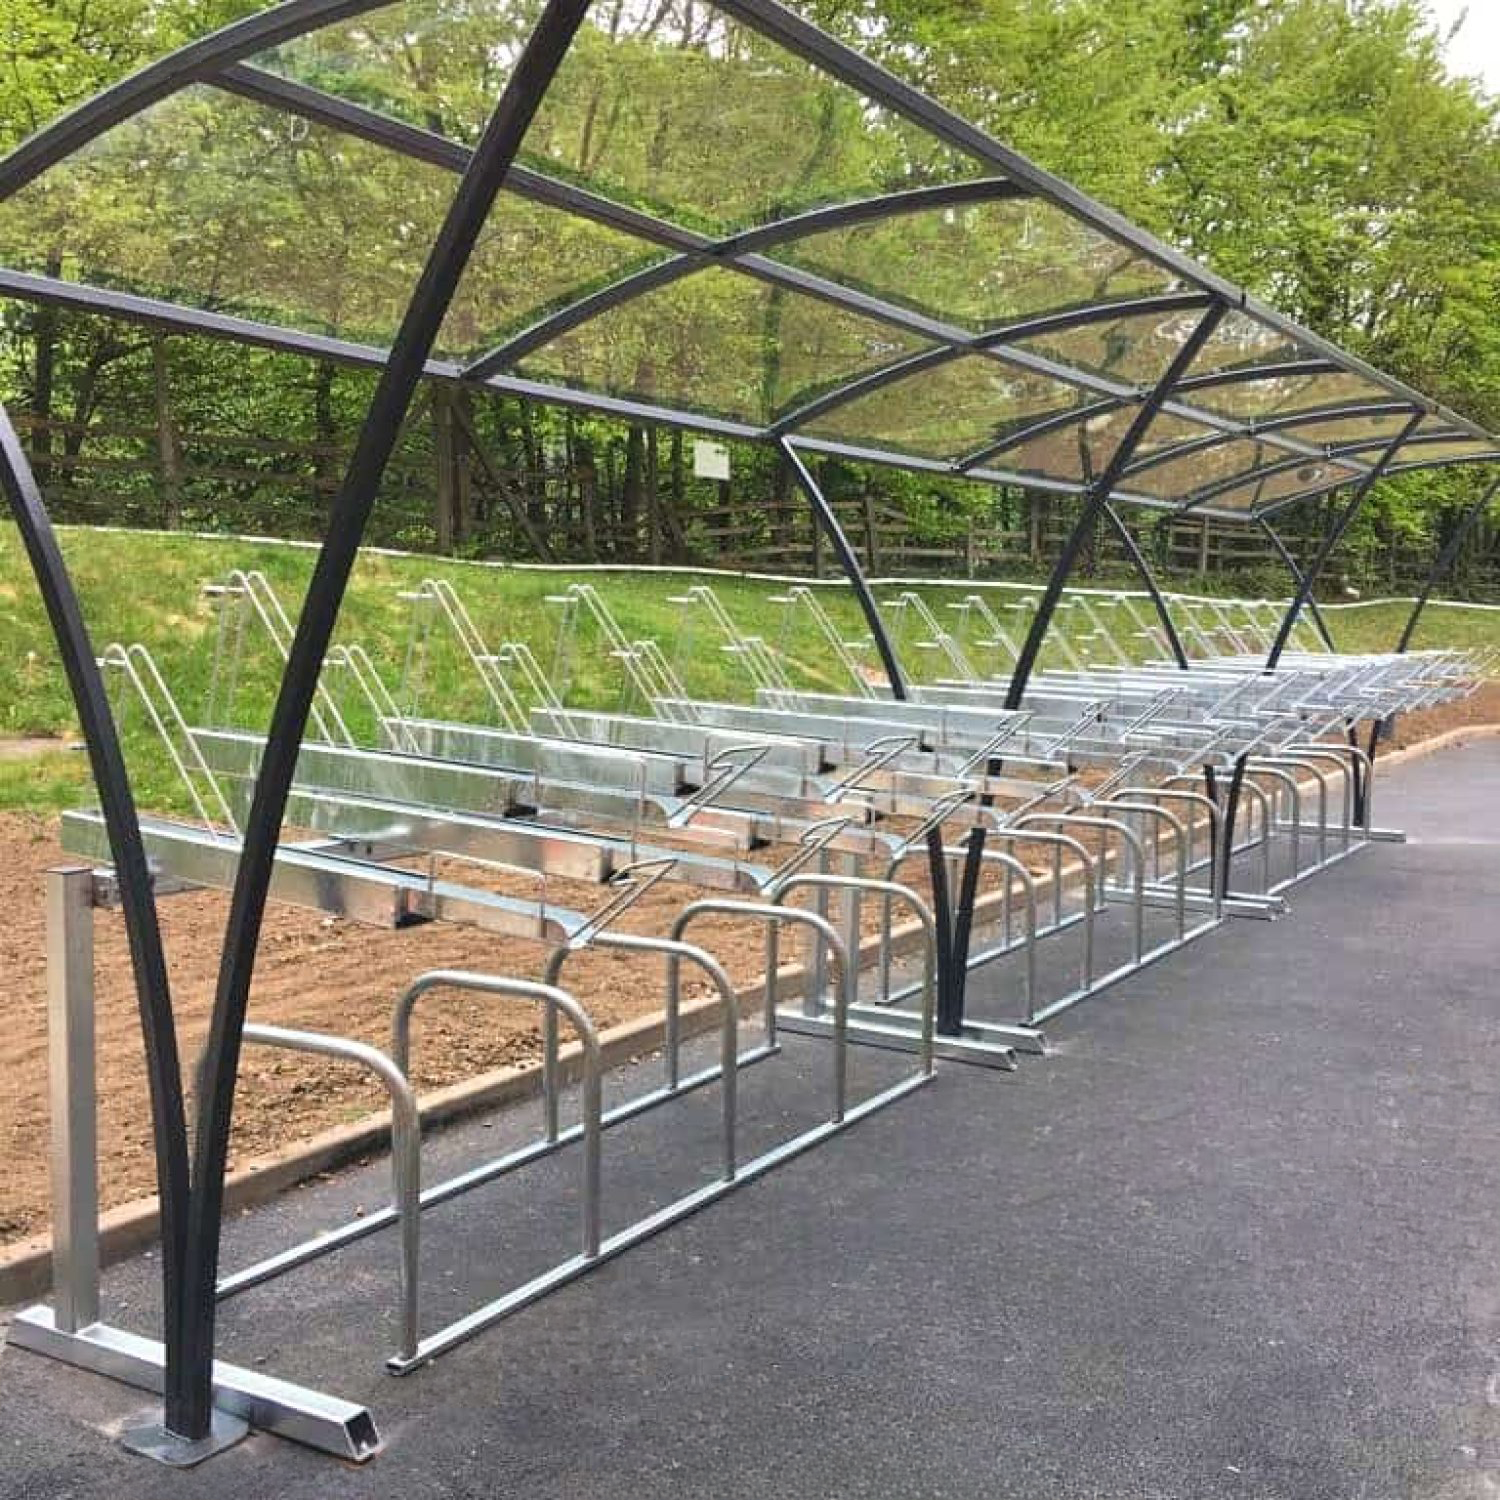 20 space Chelsea two tier cycle shelter and galvanised Sheffield stands